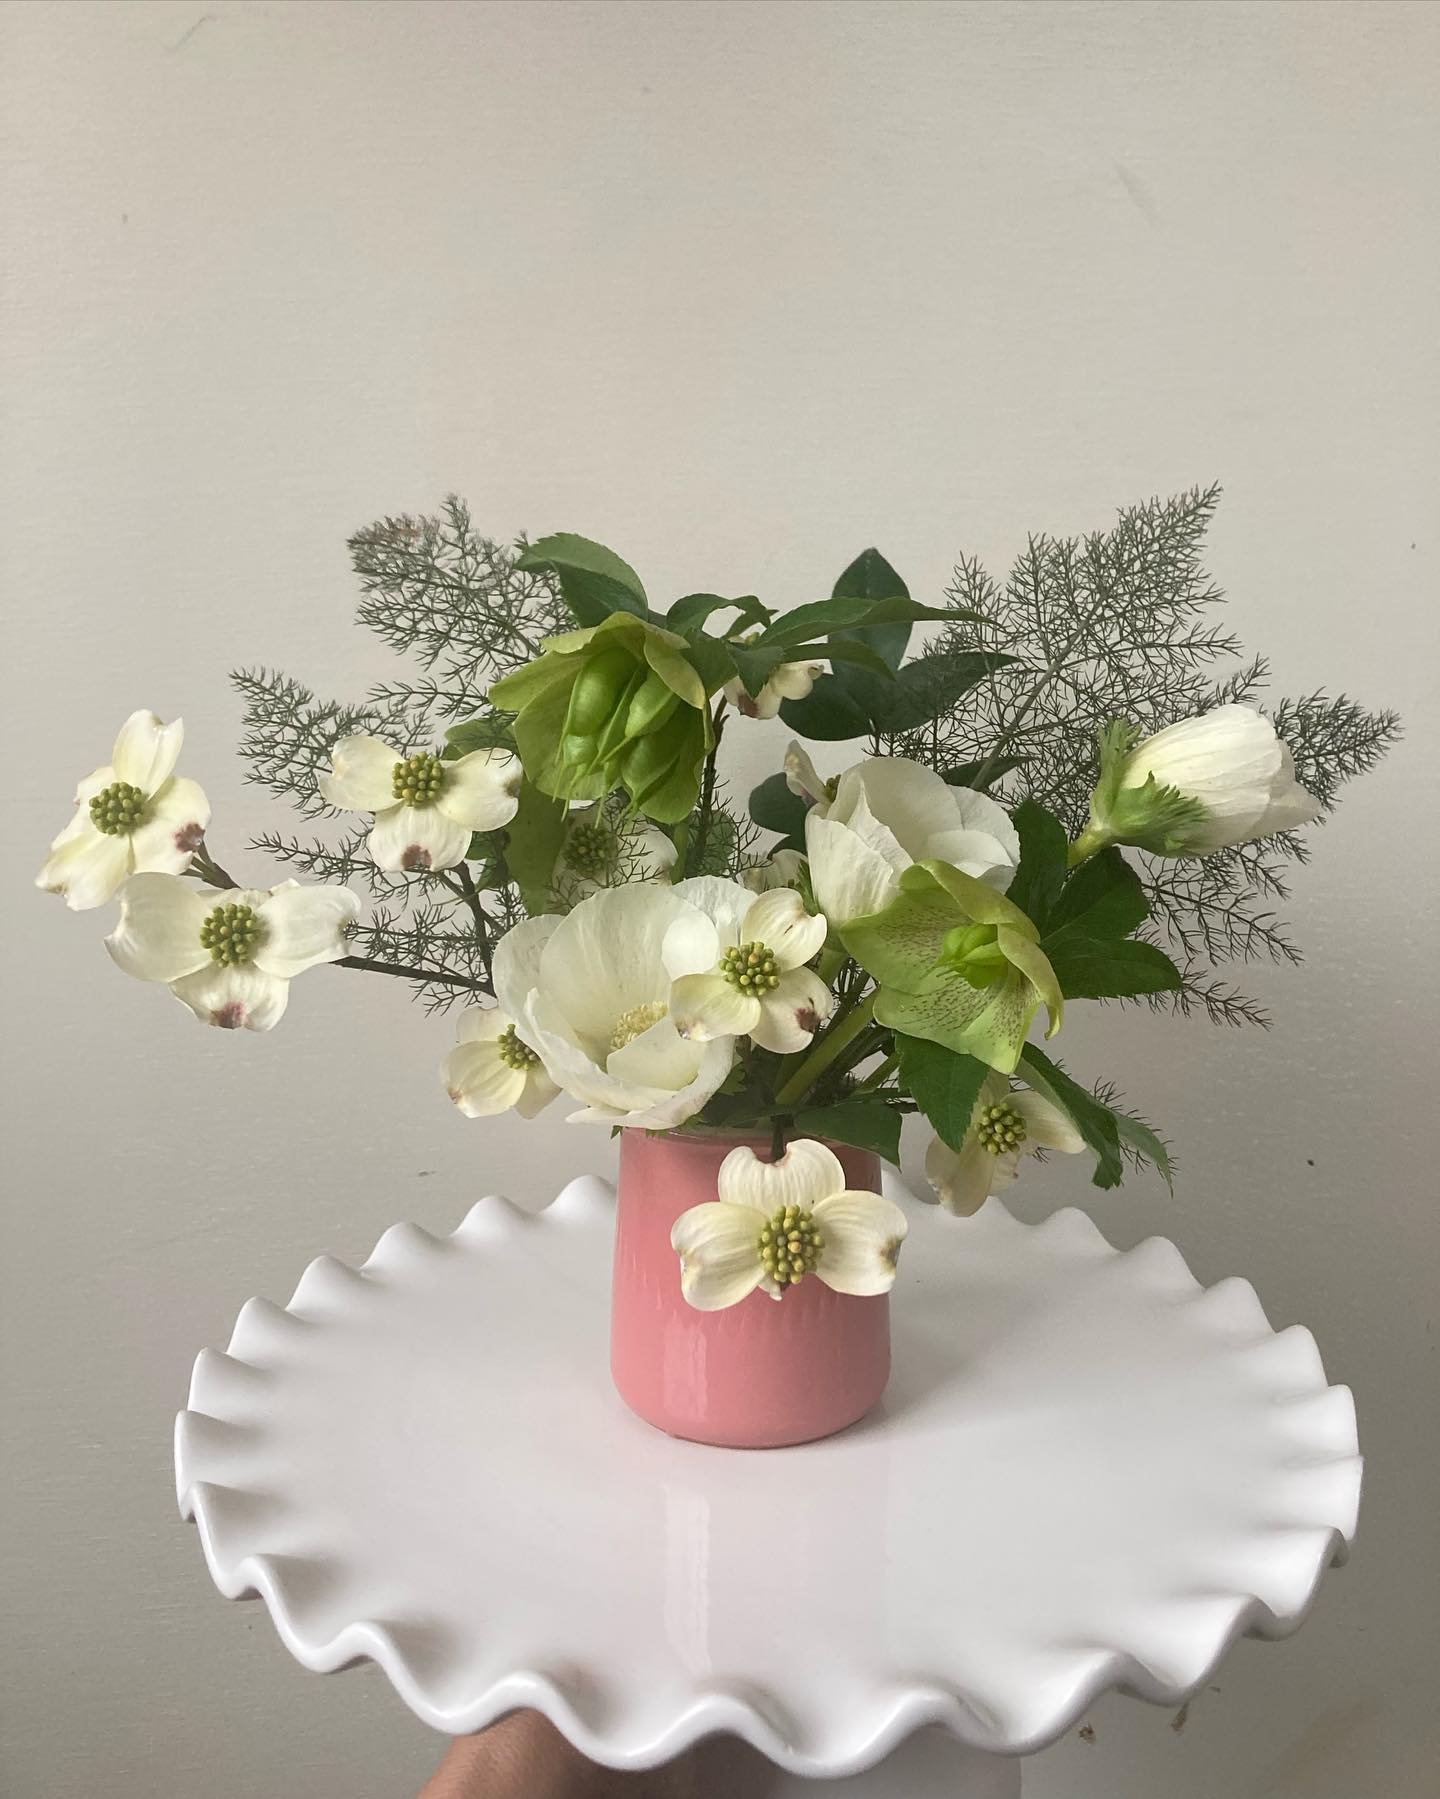 We know the impact live plants and flowers have on the senses. That&rsquo;s why, when you order a flower arrangement for your stay, we don&rsquo;t ship the request out to a fulfillment center. 

Every arrangement is hand crafted by Lauren at @flowerc